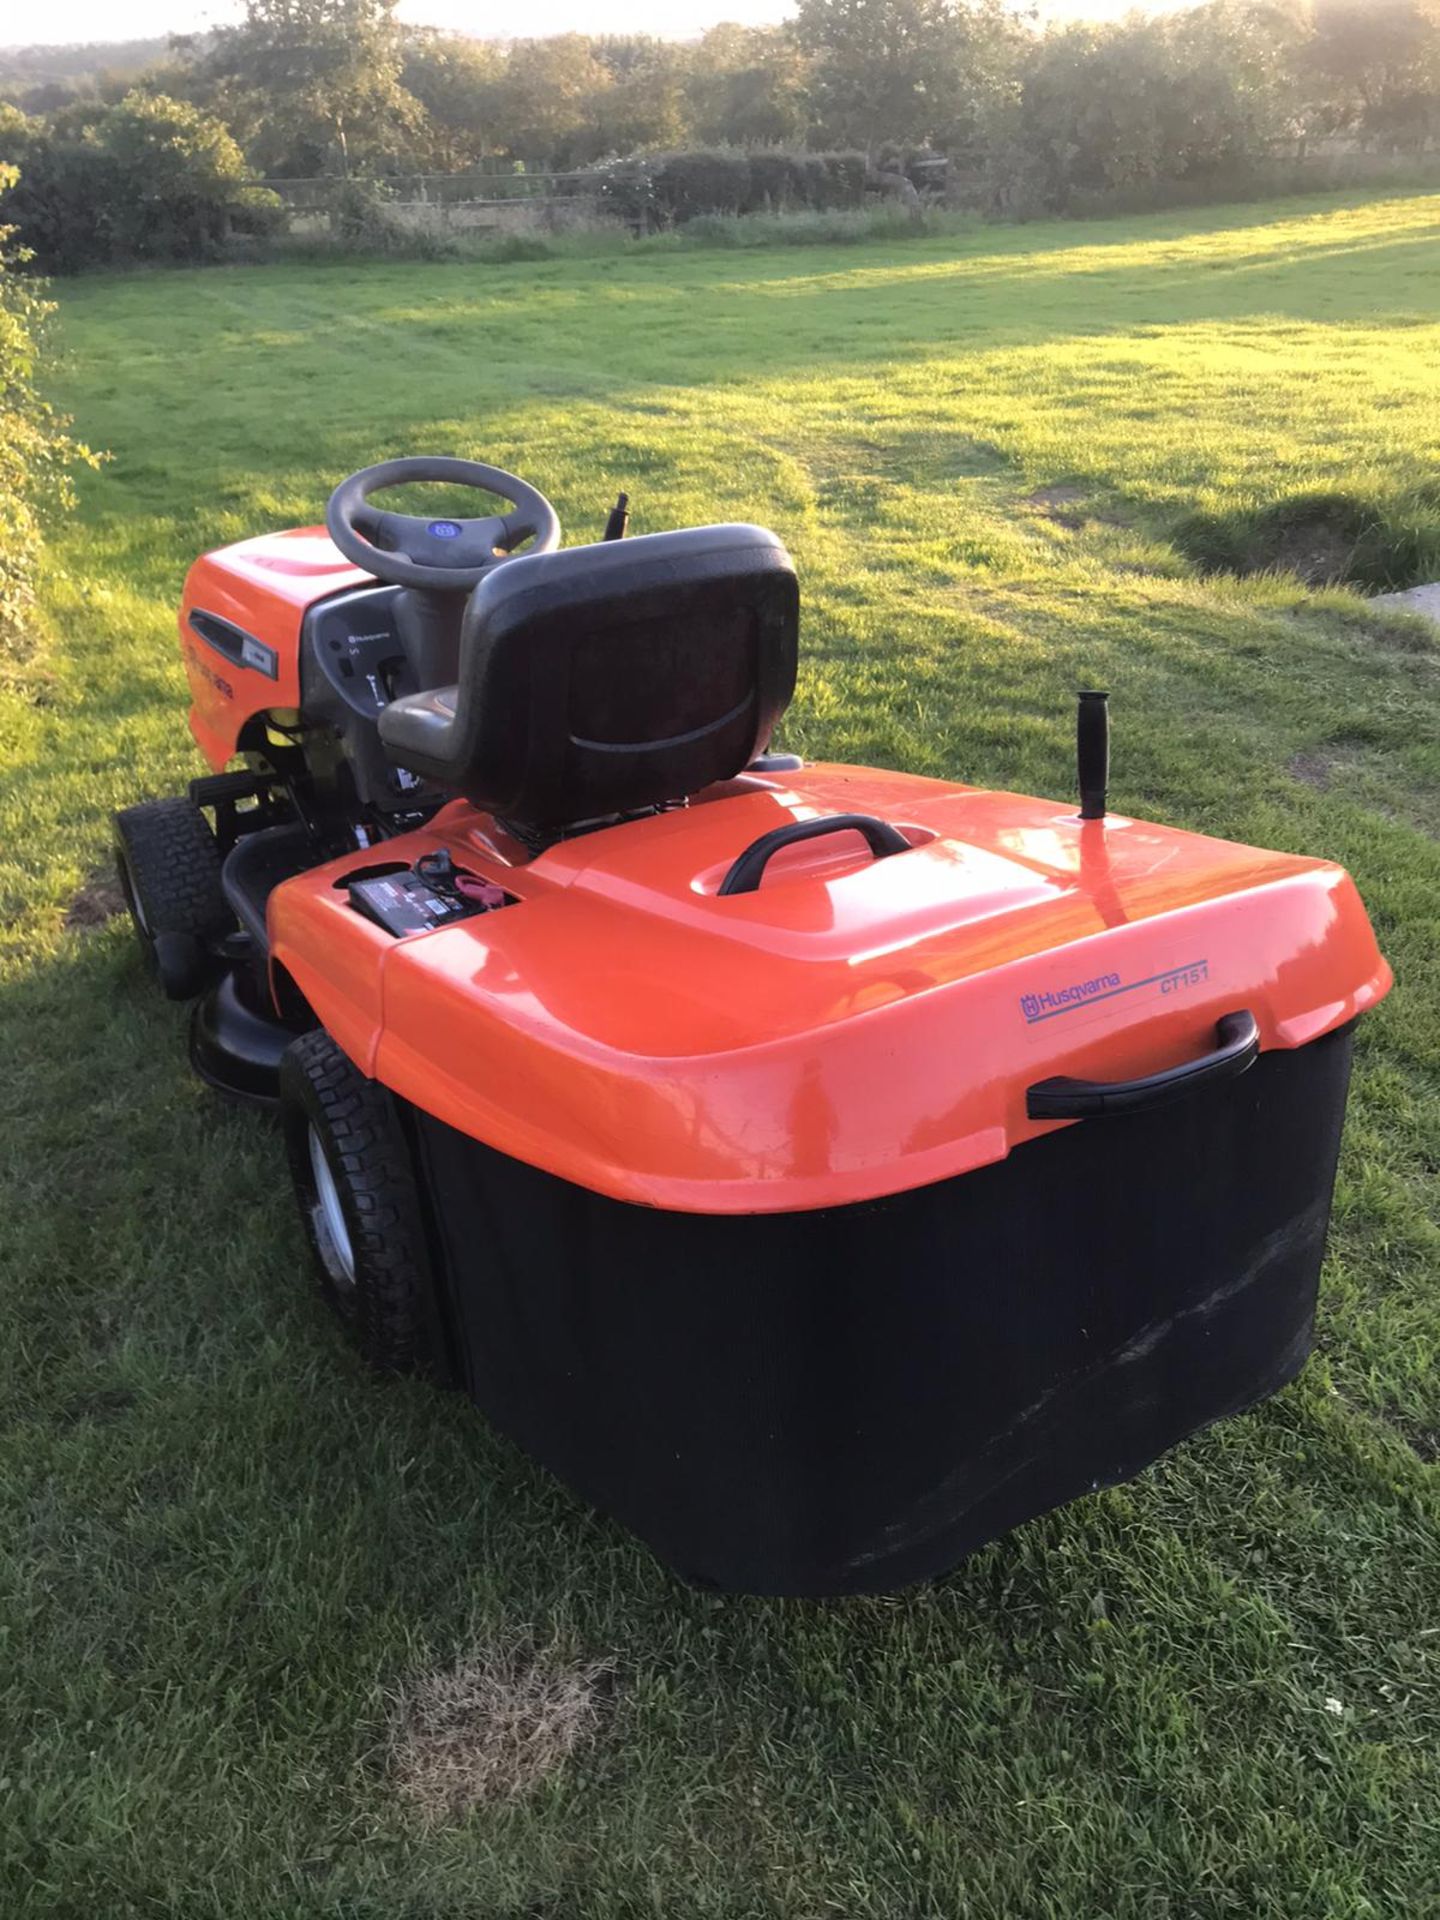 HUSQVARNA CT151 RIDE ON LAWN MOWER, GOOD CONDITION, RUNS, DRIVES AND CUTS *NO VAT* - Image 3 of 6